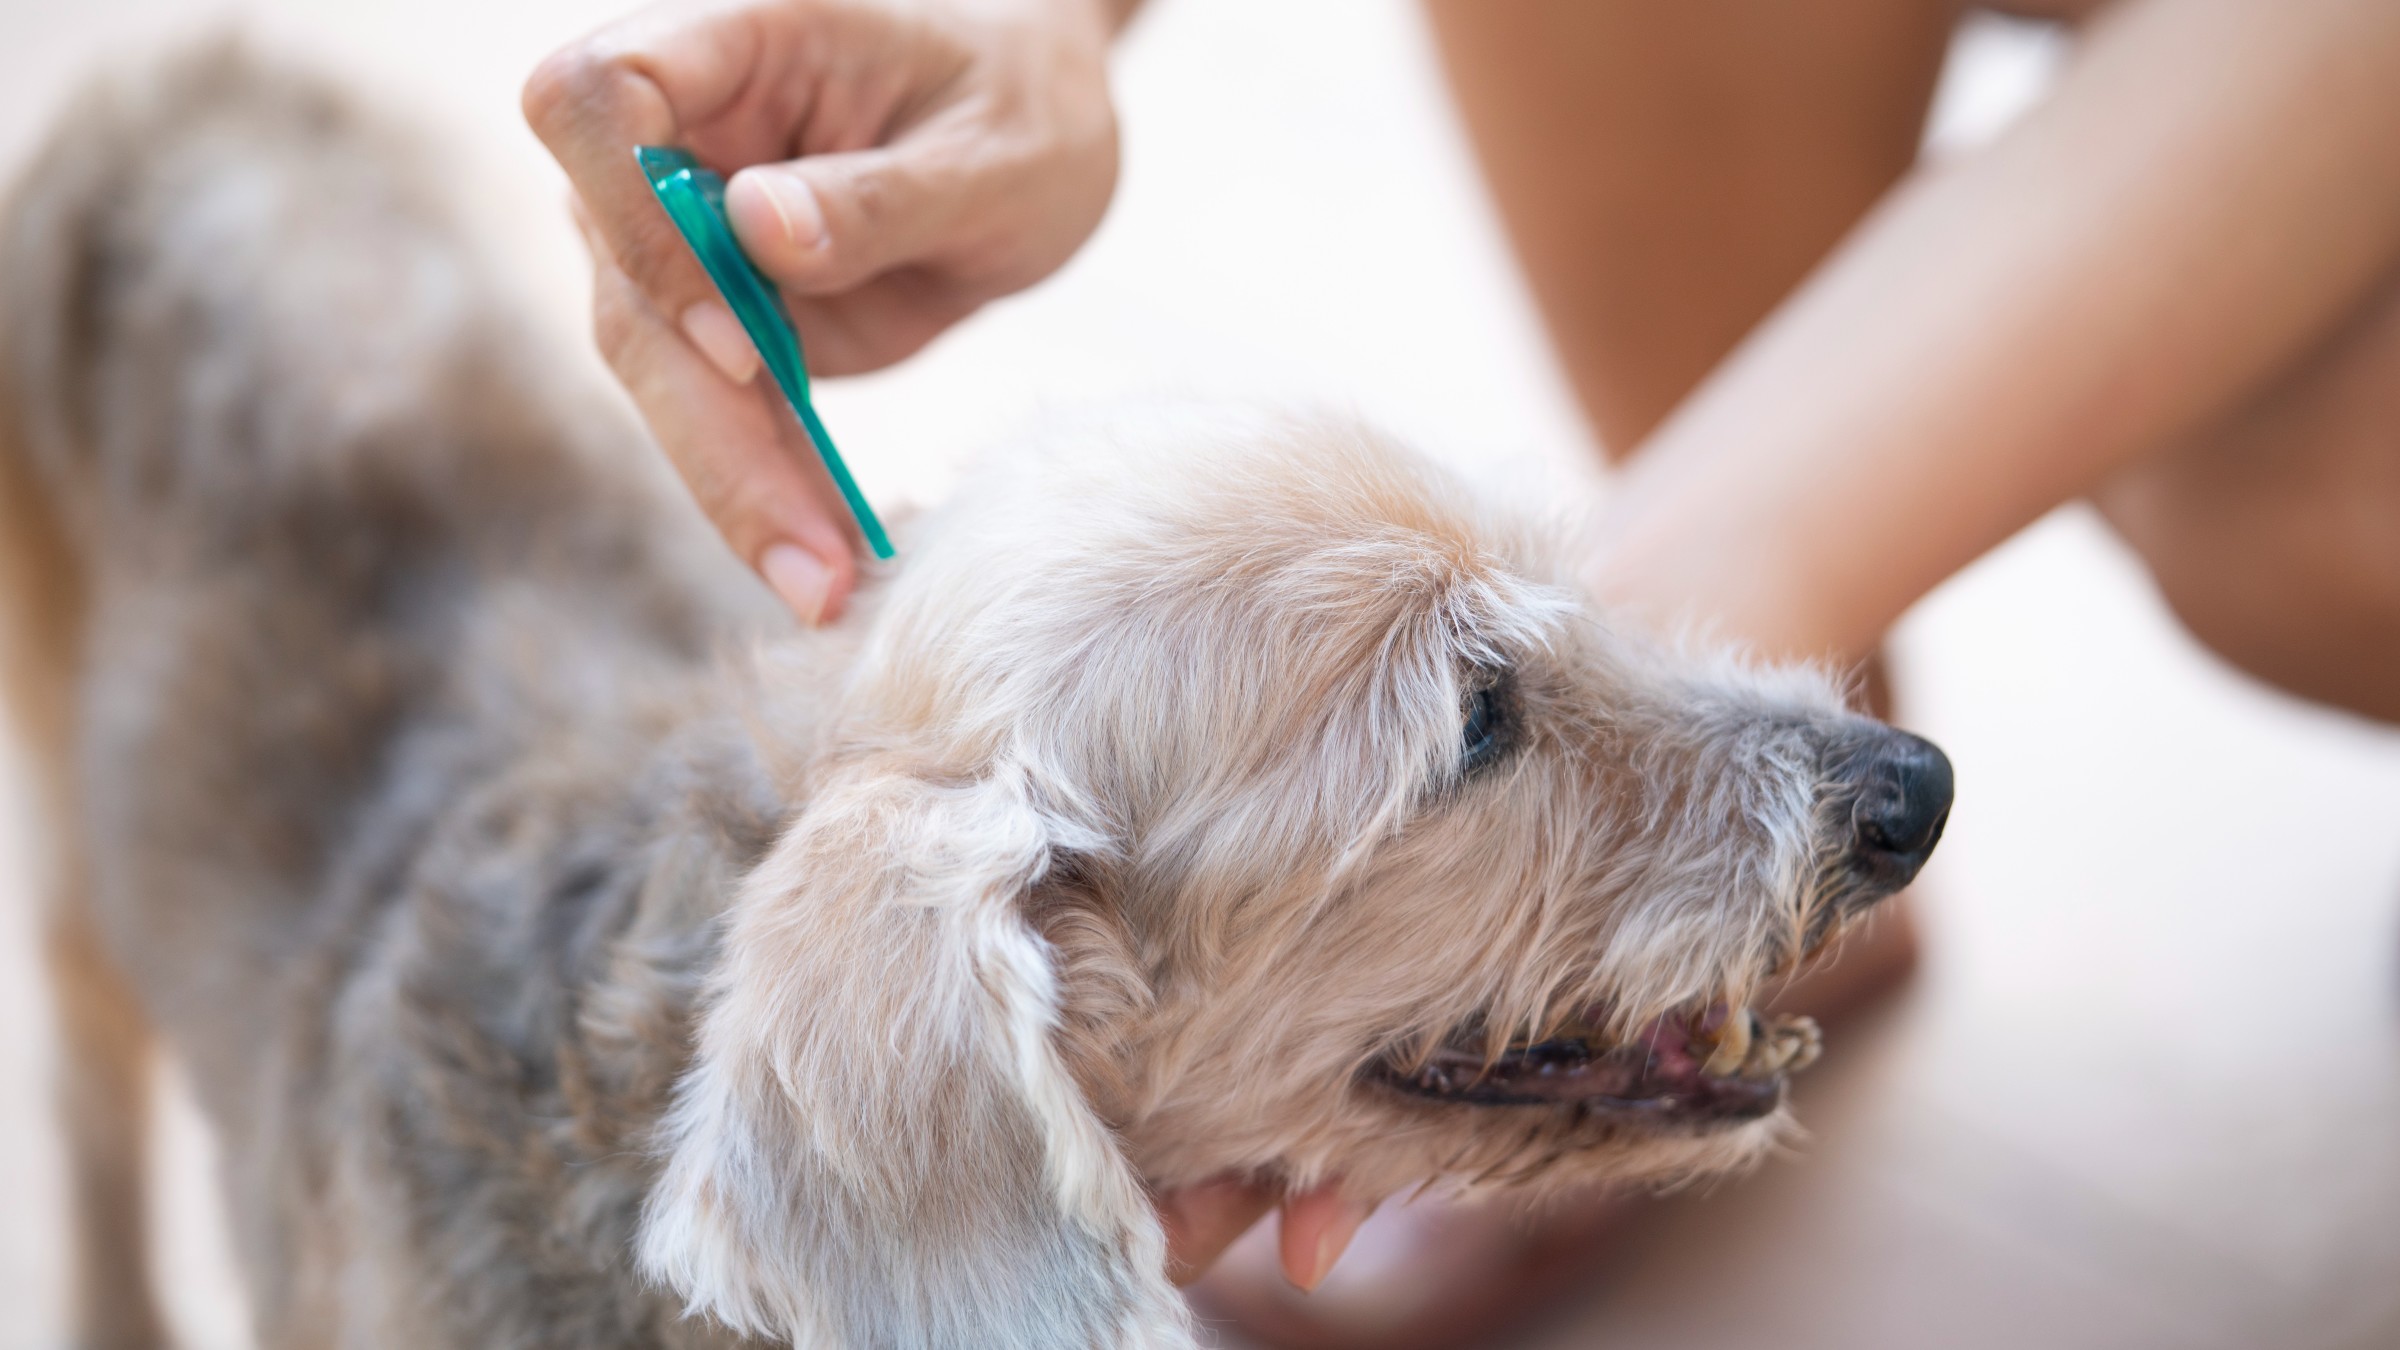 Tick Treatments For Dogs: What Kills Ticks Quickly - Goodrx